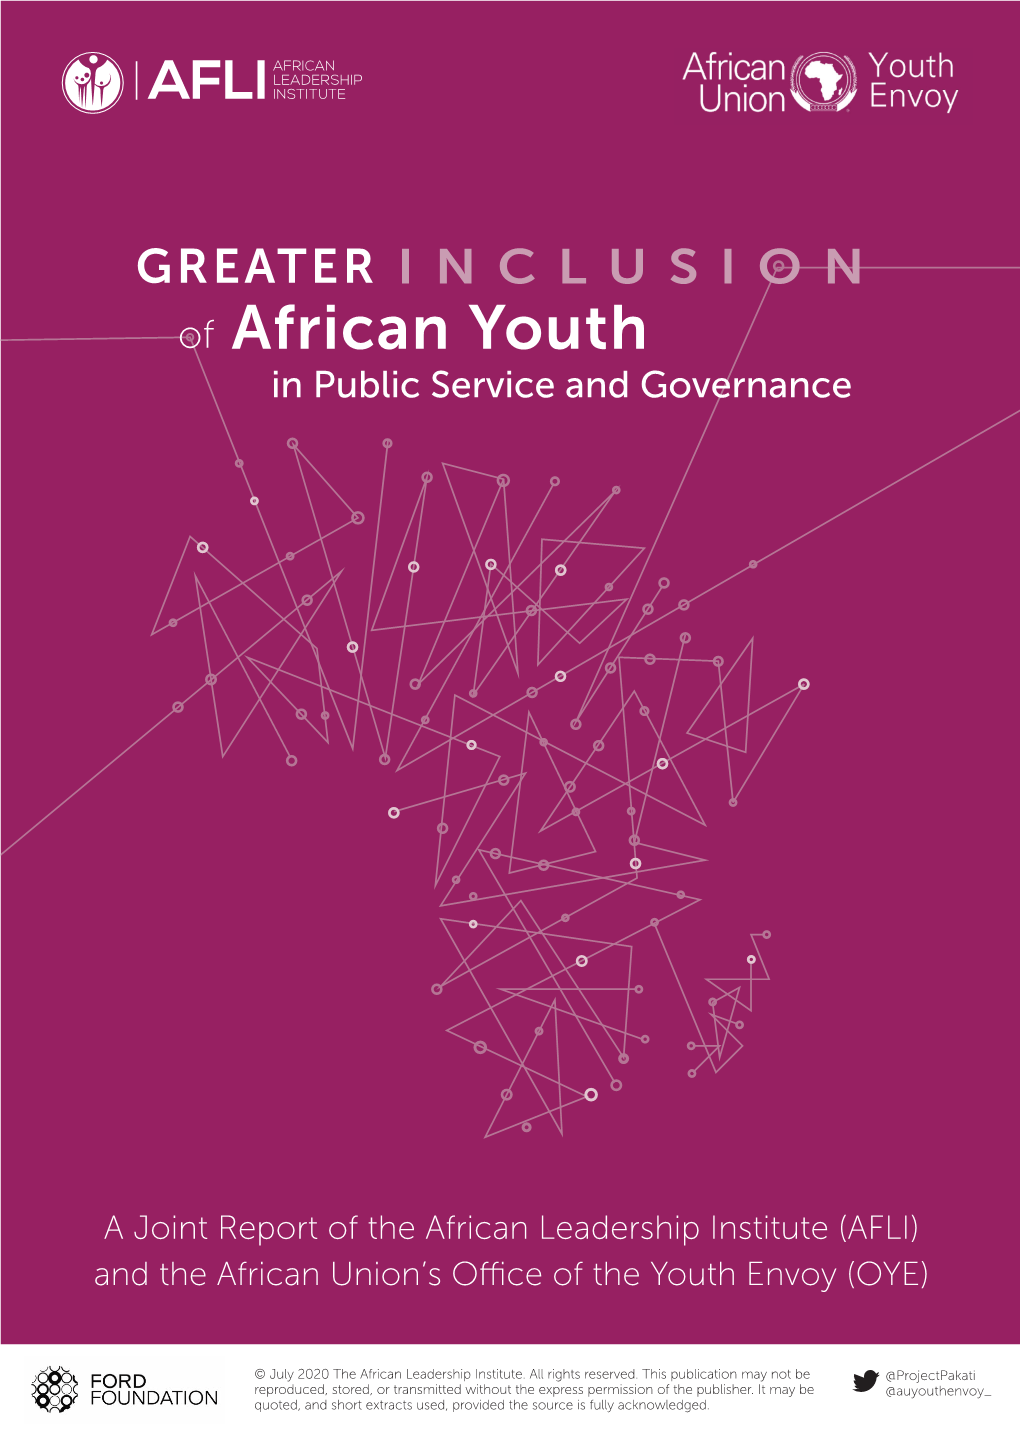 Report on Greater Inclusion of African Youth in Public Service